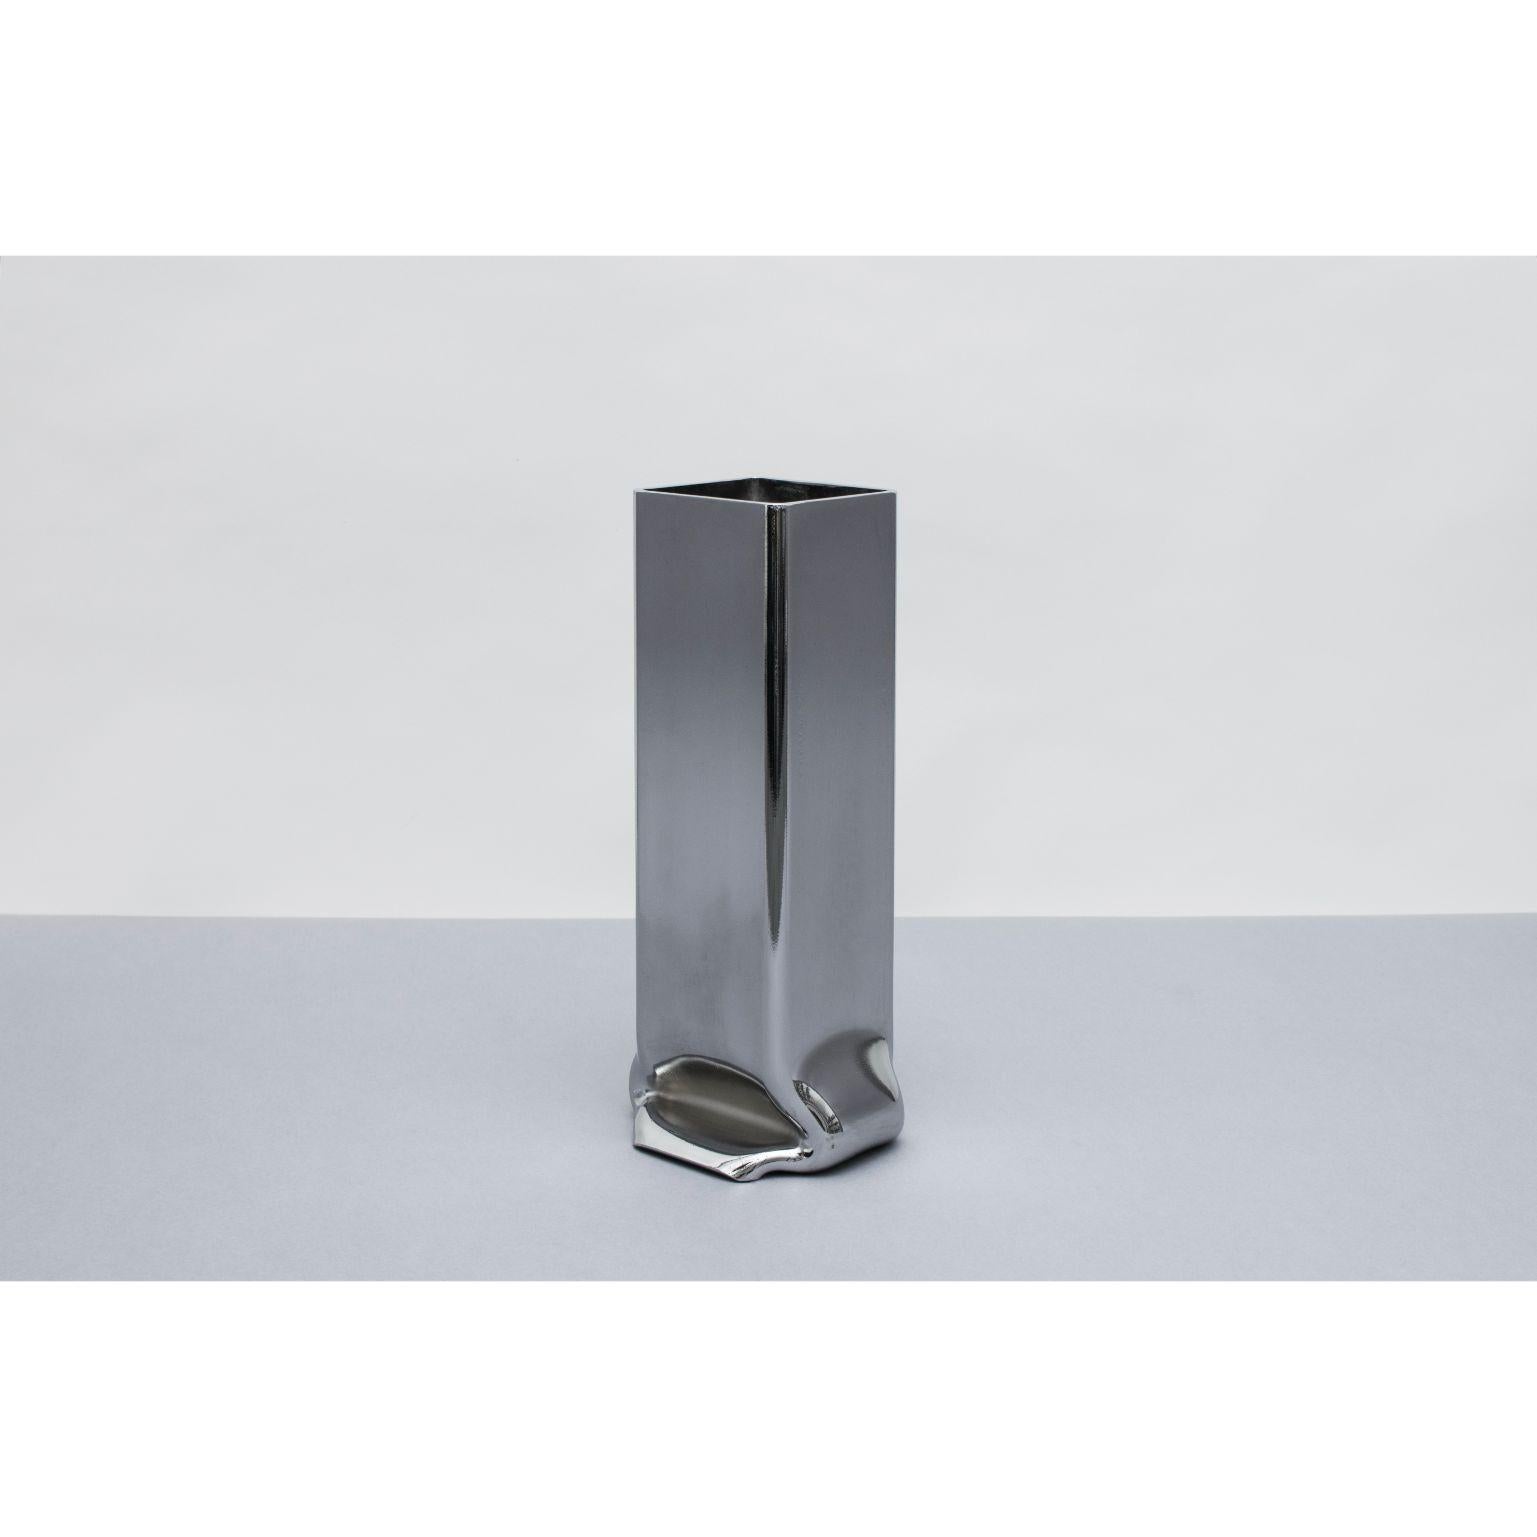 Chrome plated pressure vase XL by Tim Teven
Pressure Series (2018 - Ongoing)
Dimensions: 20 x 10 x 48 cm
Materials: Chrome plated steel or stainless steel

Available in different sizes, colors, and finishes.

Pressure Vases, 2018 - ongoing